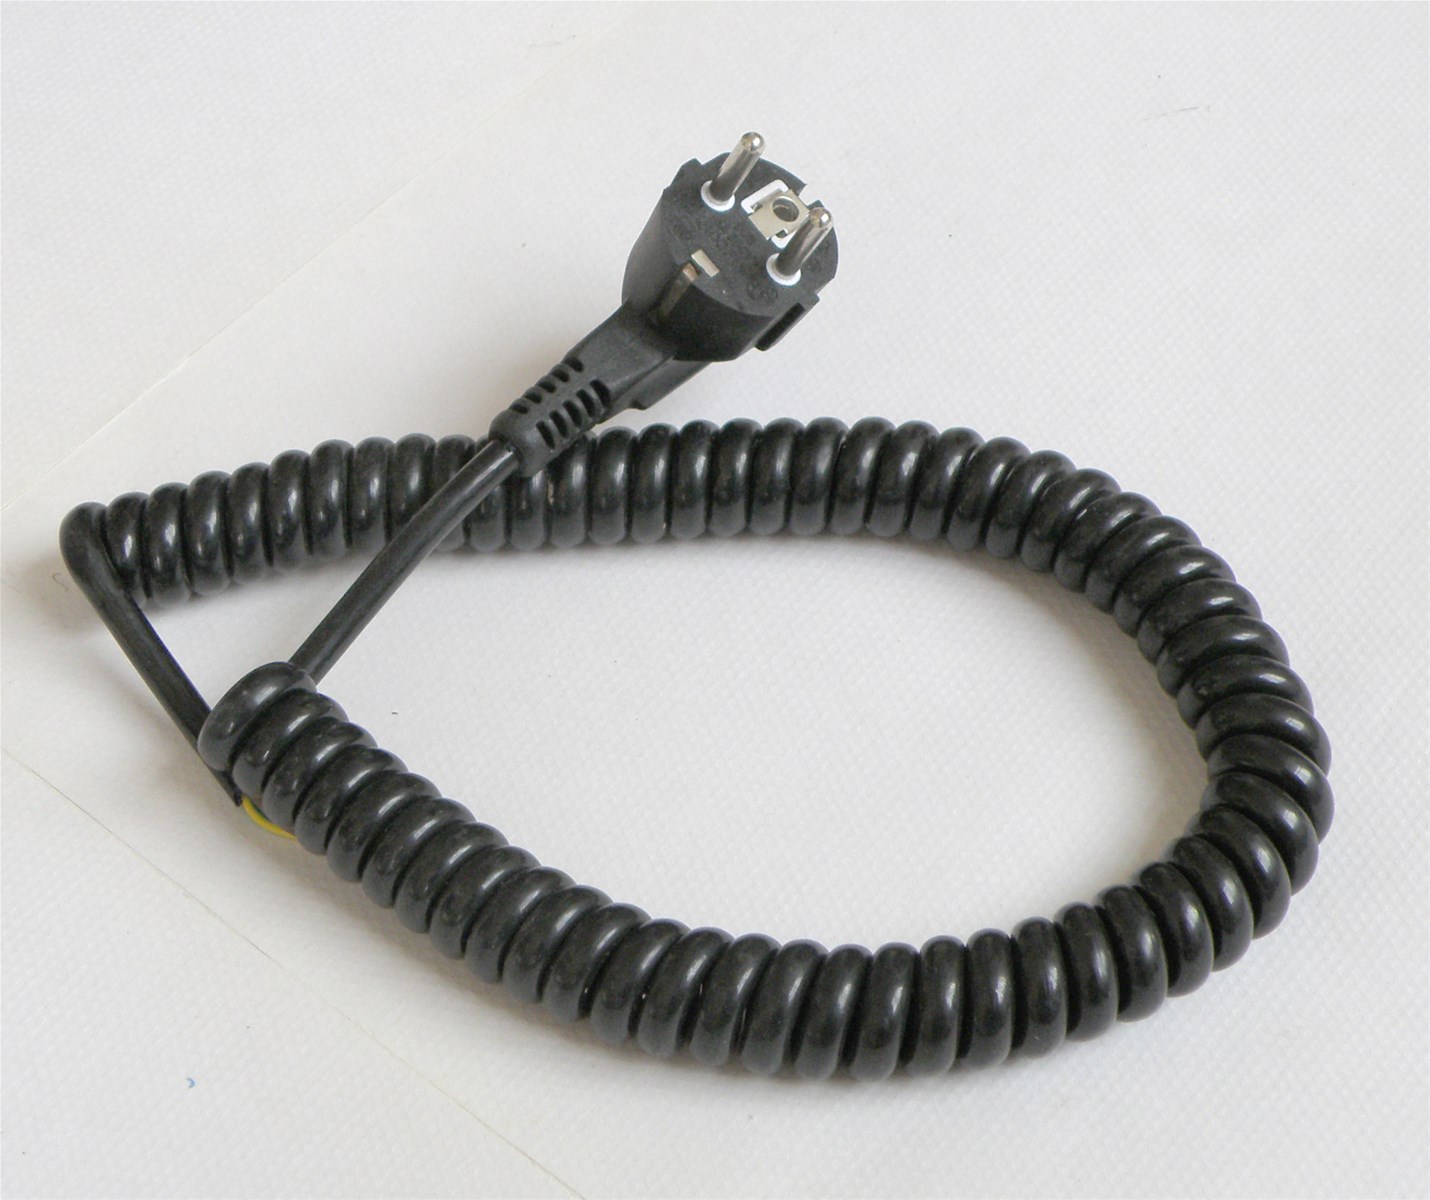 3PHASE EUROPEAN STANDARD PLUG POWER CORD COILED CABLE SPIRAL CABLE